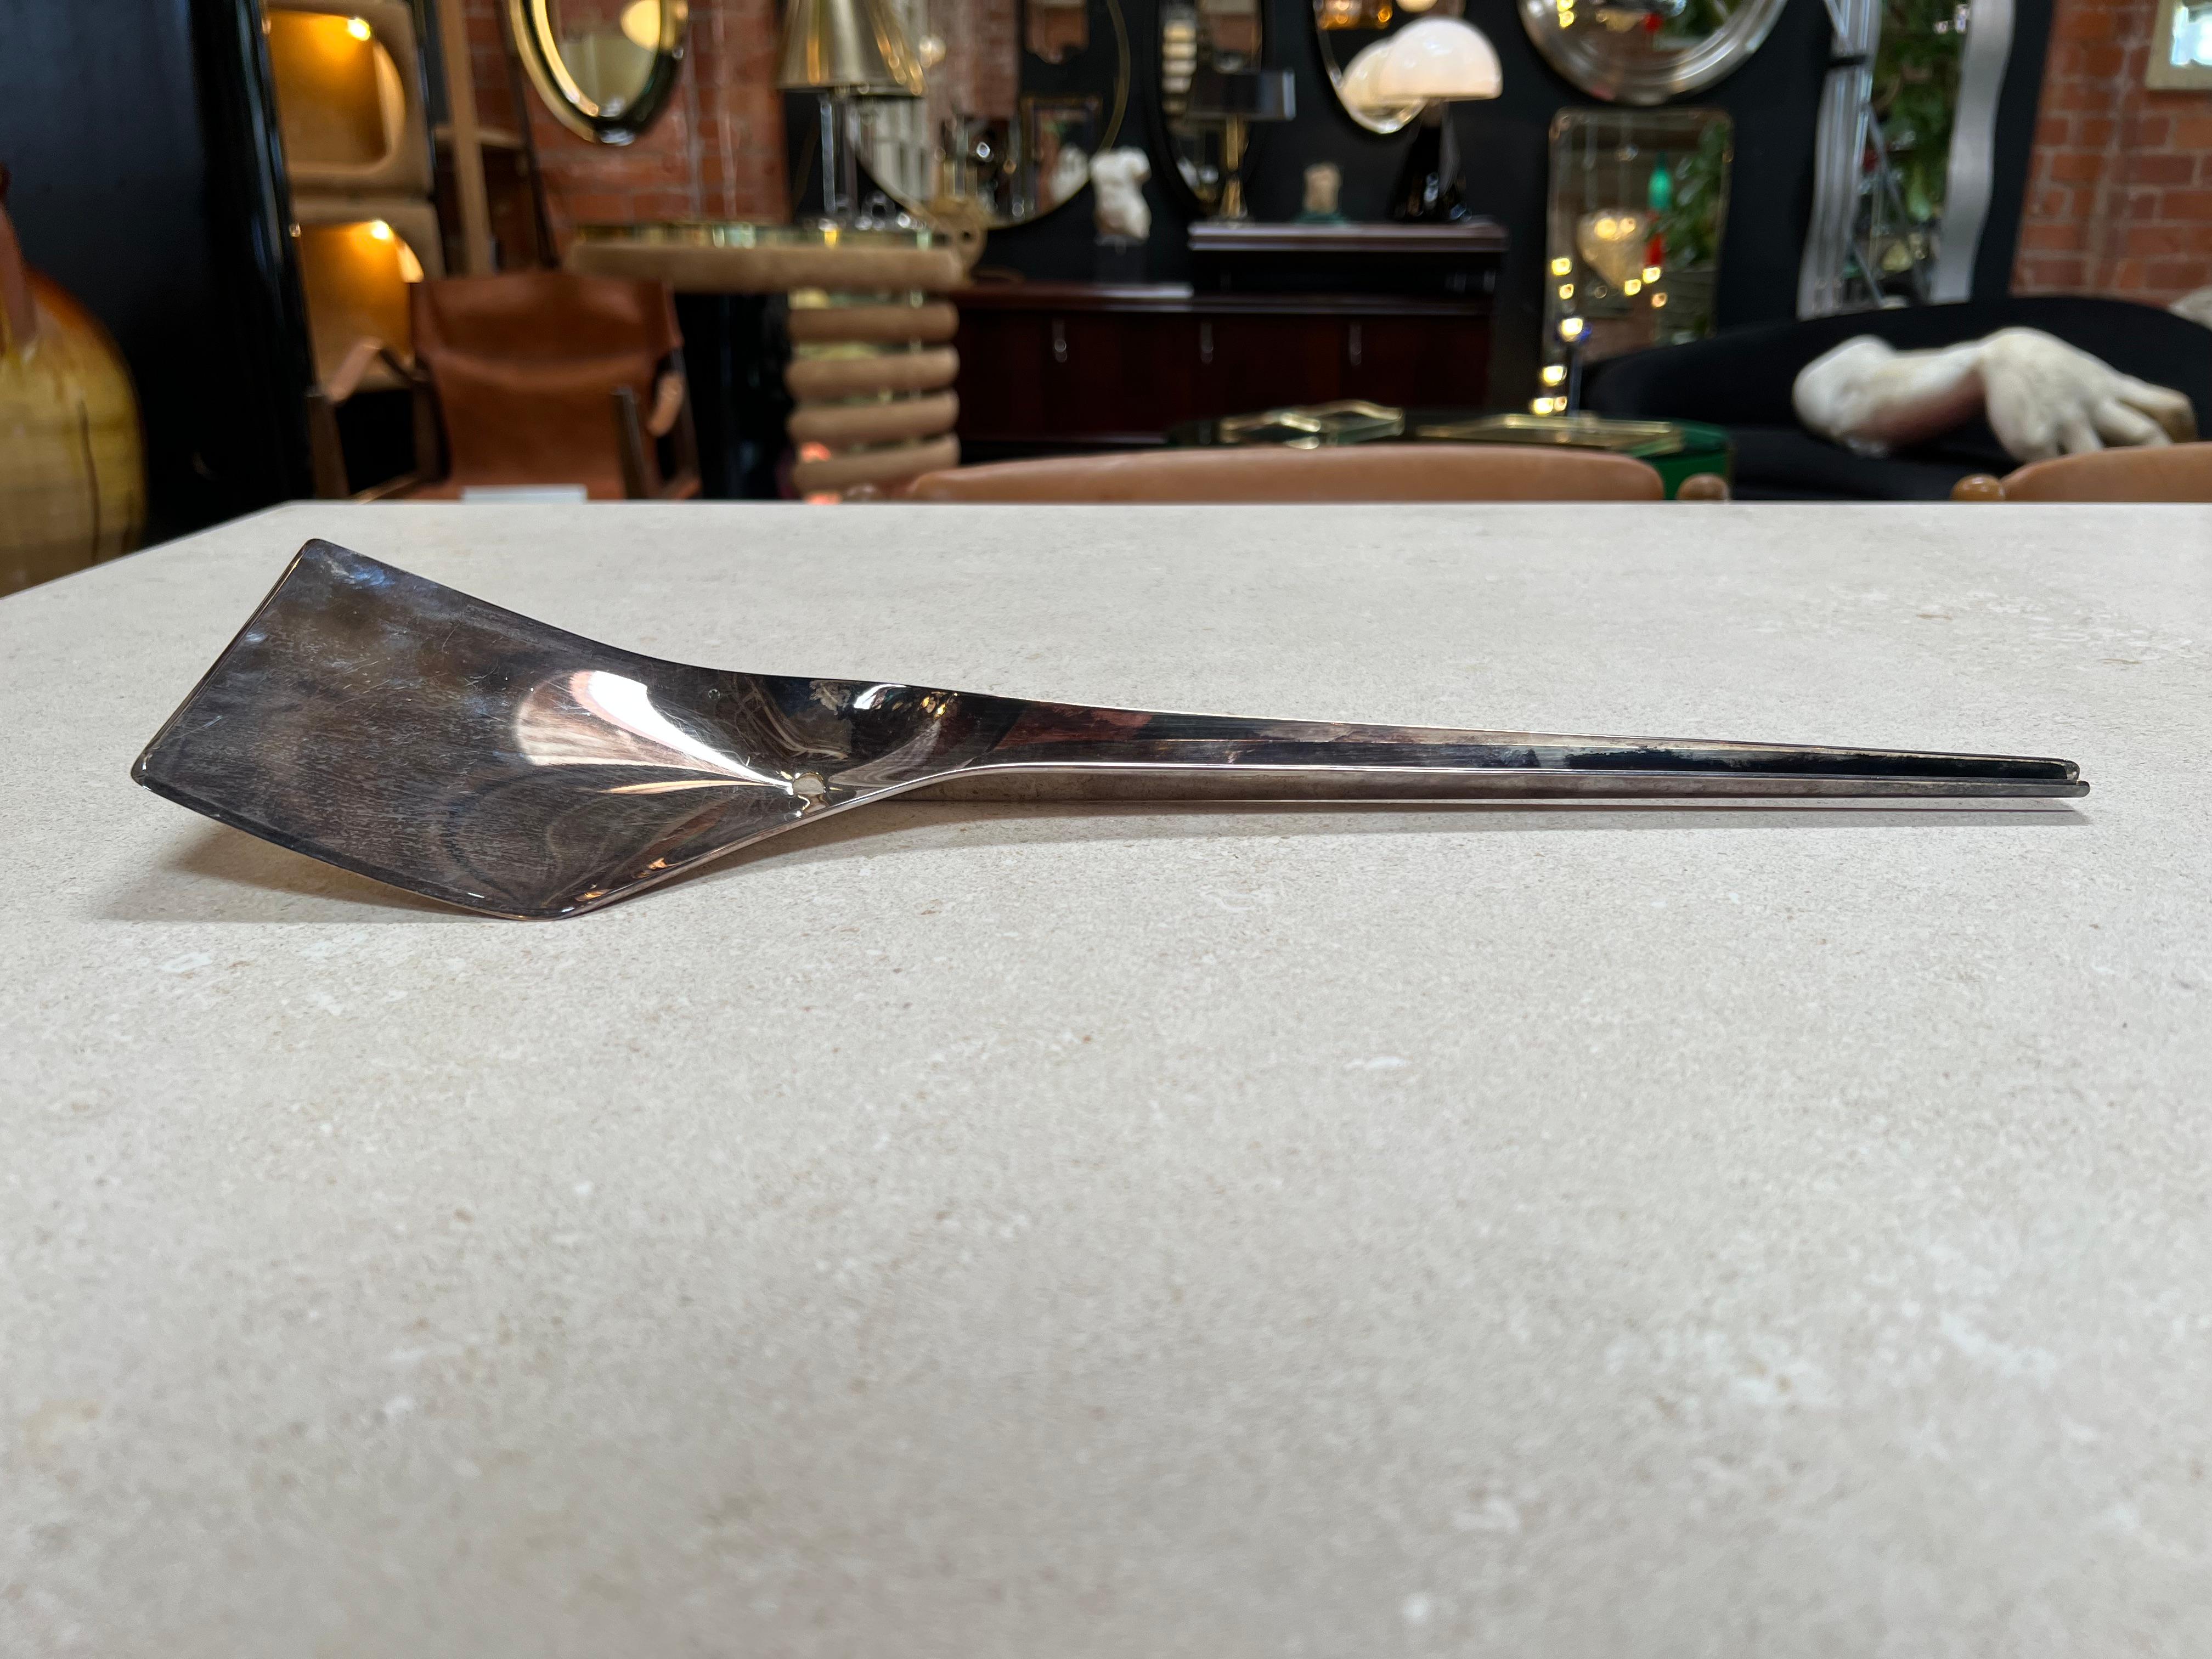 Certainly! The Vintage Italian Decorative Scoop by Sabatini is a delightful and unique piece that effortlessly combines functionality with artistic flair. Crafted with the meticulous attention to detail that Italian design is known for, this scoop